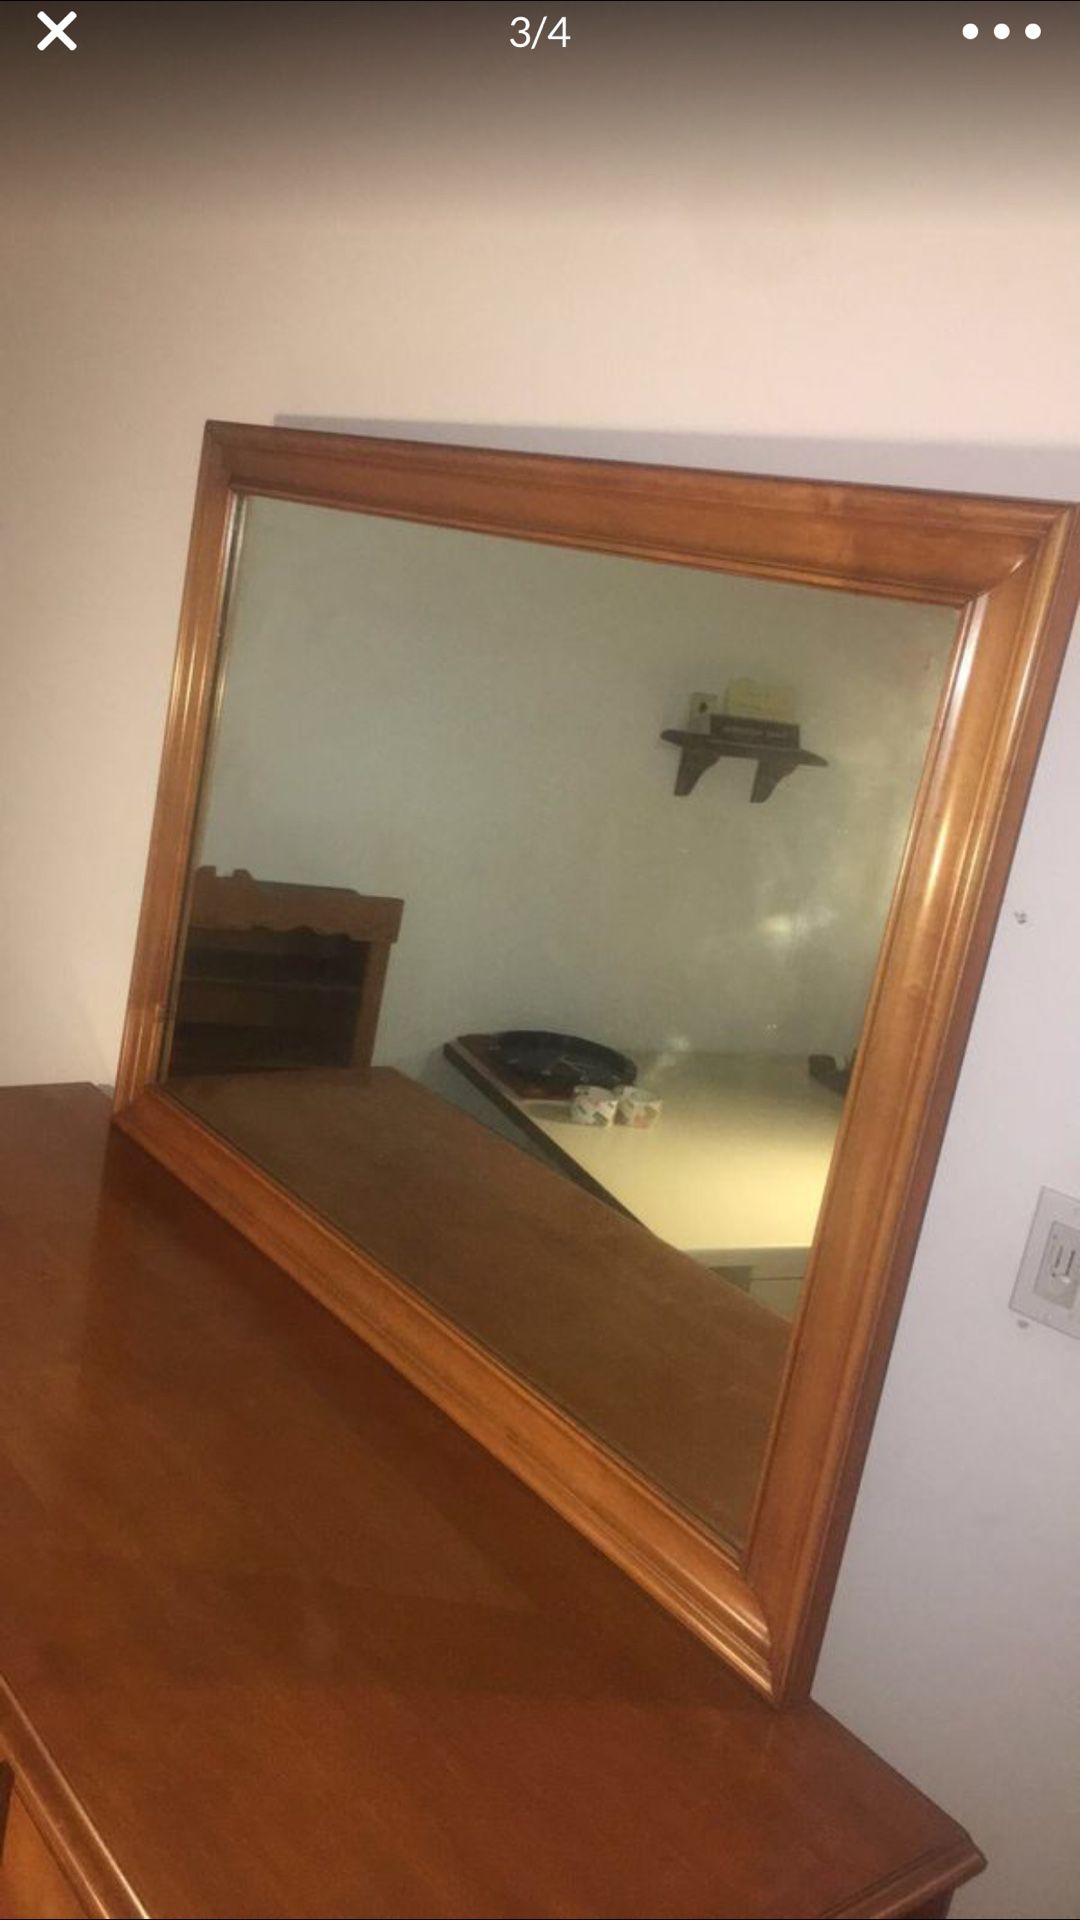 1970’s solid wood dresser with Mirror 